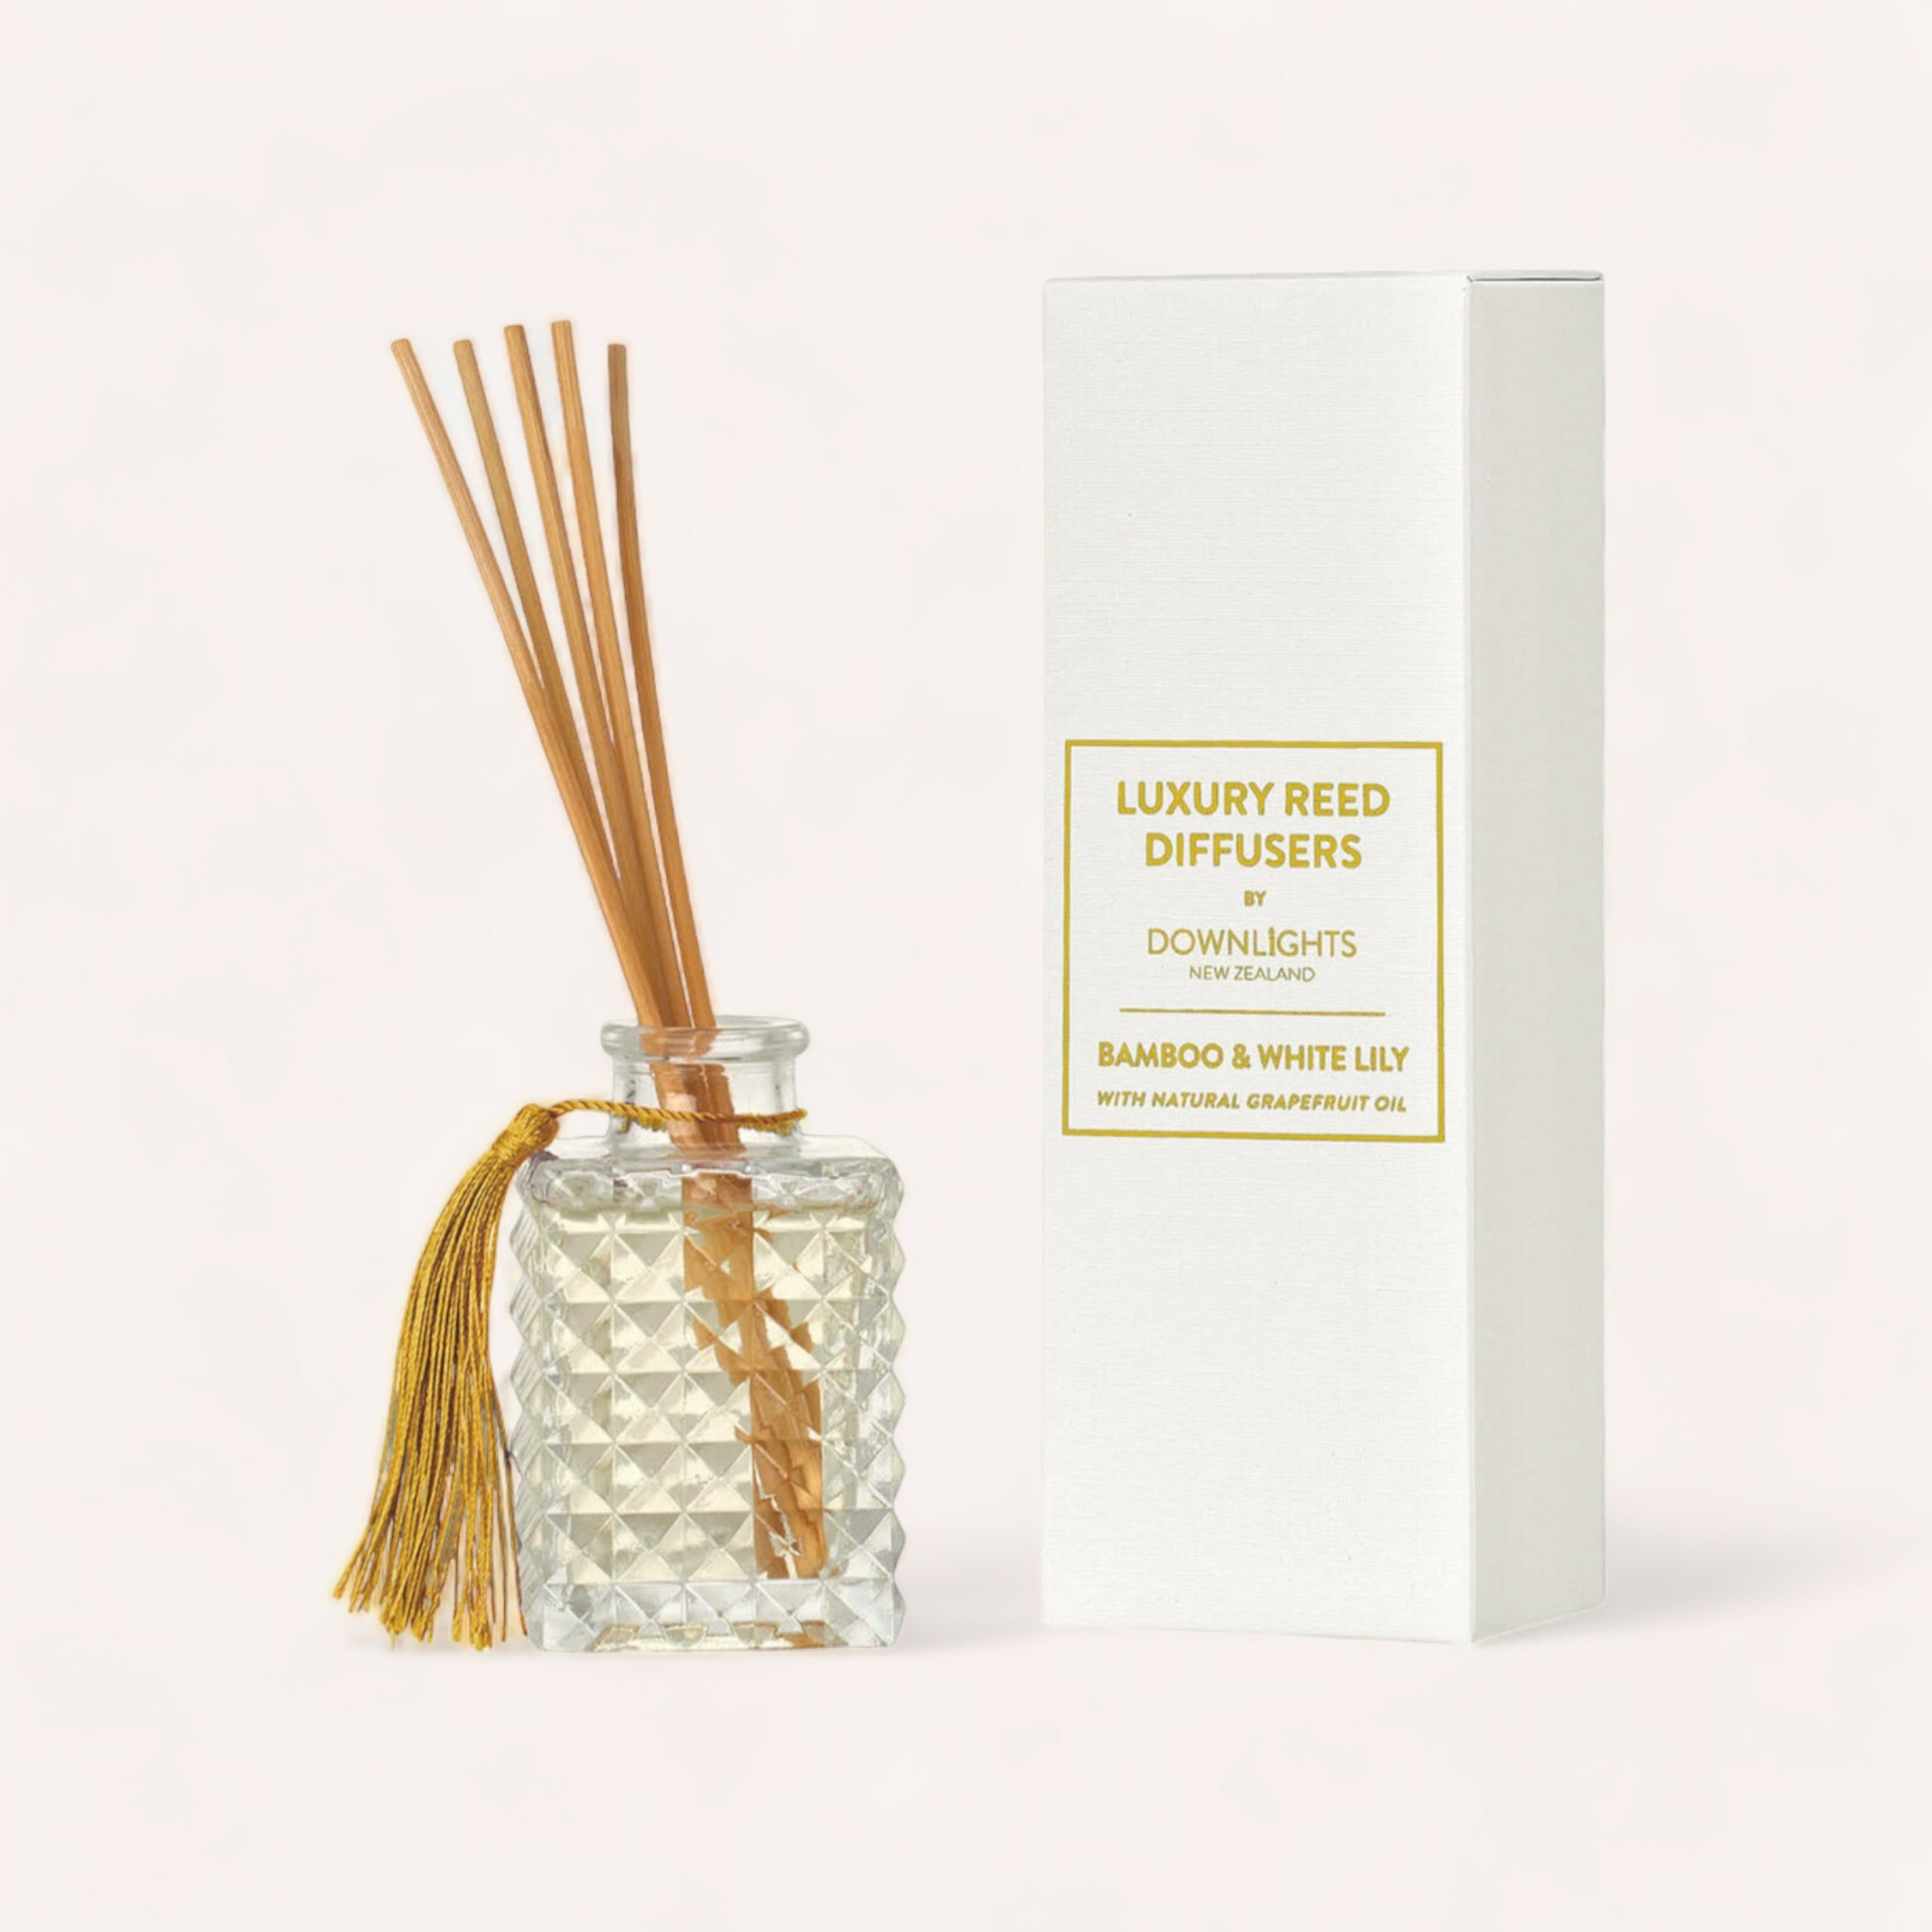 luxury reed diffuser bamboo & white lily by downlights new zealand